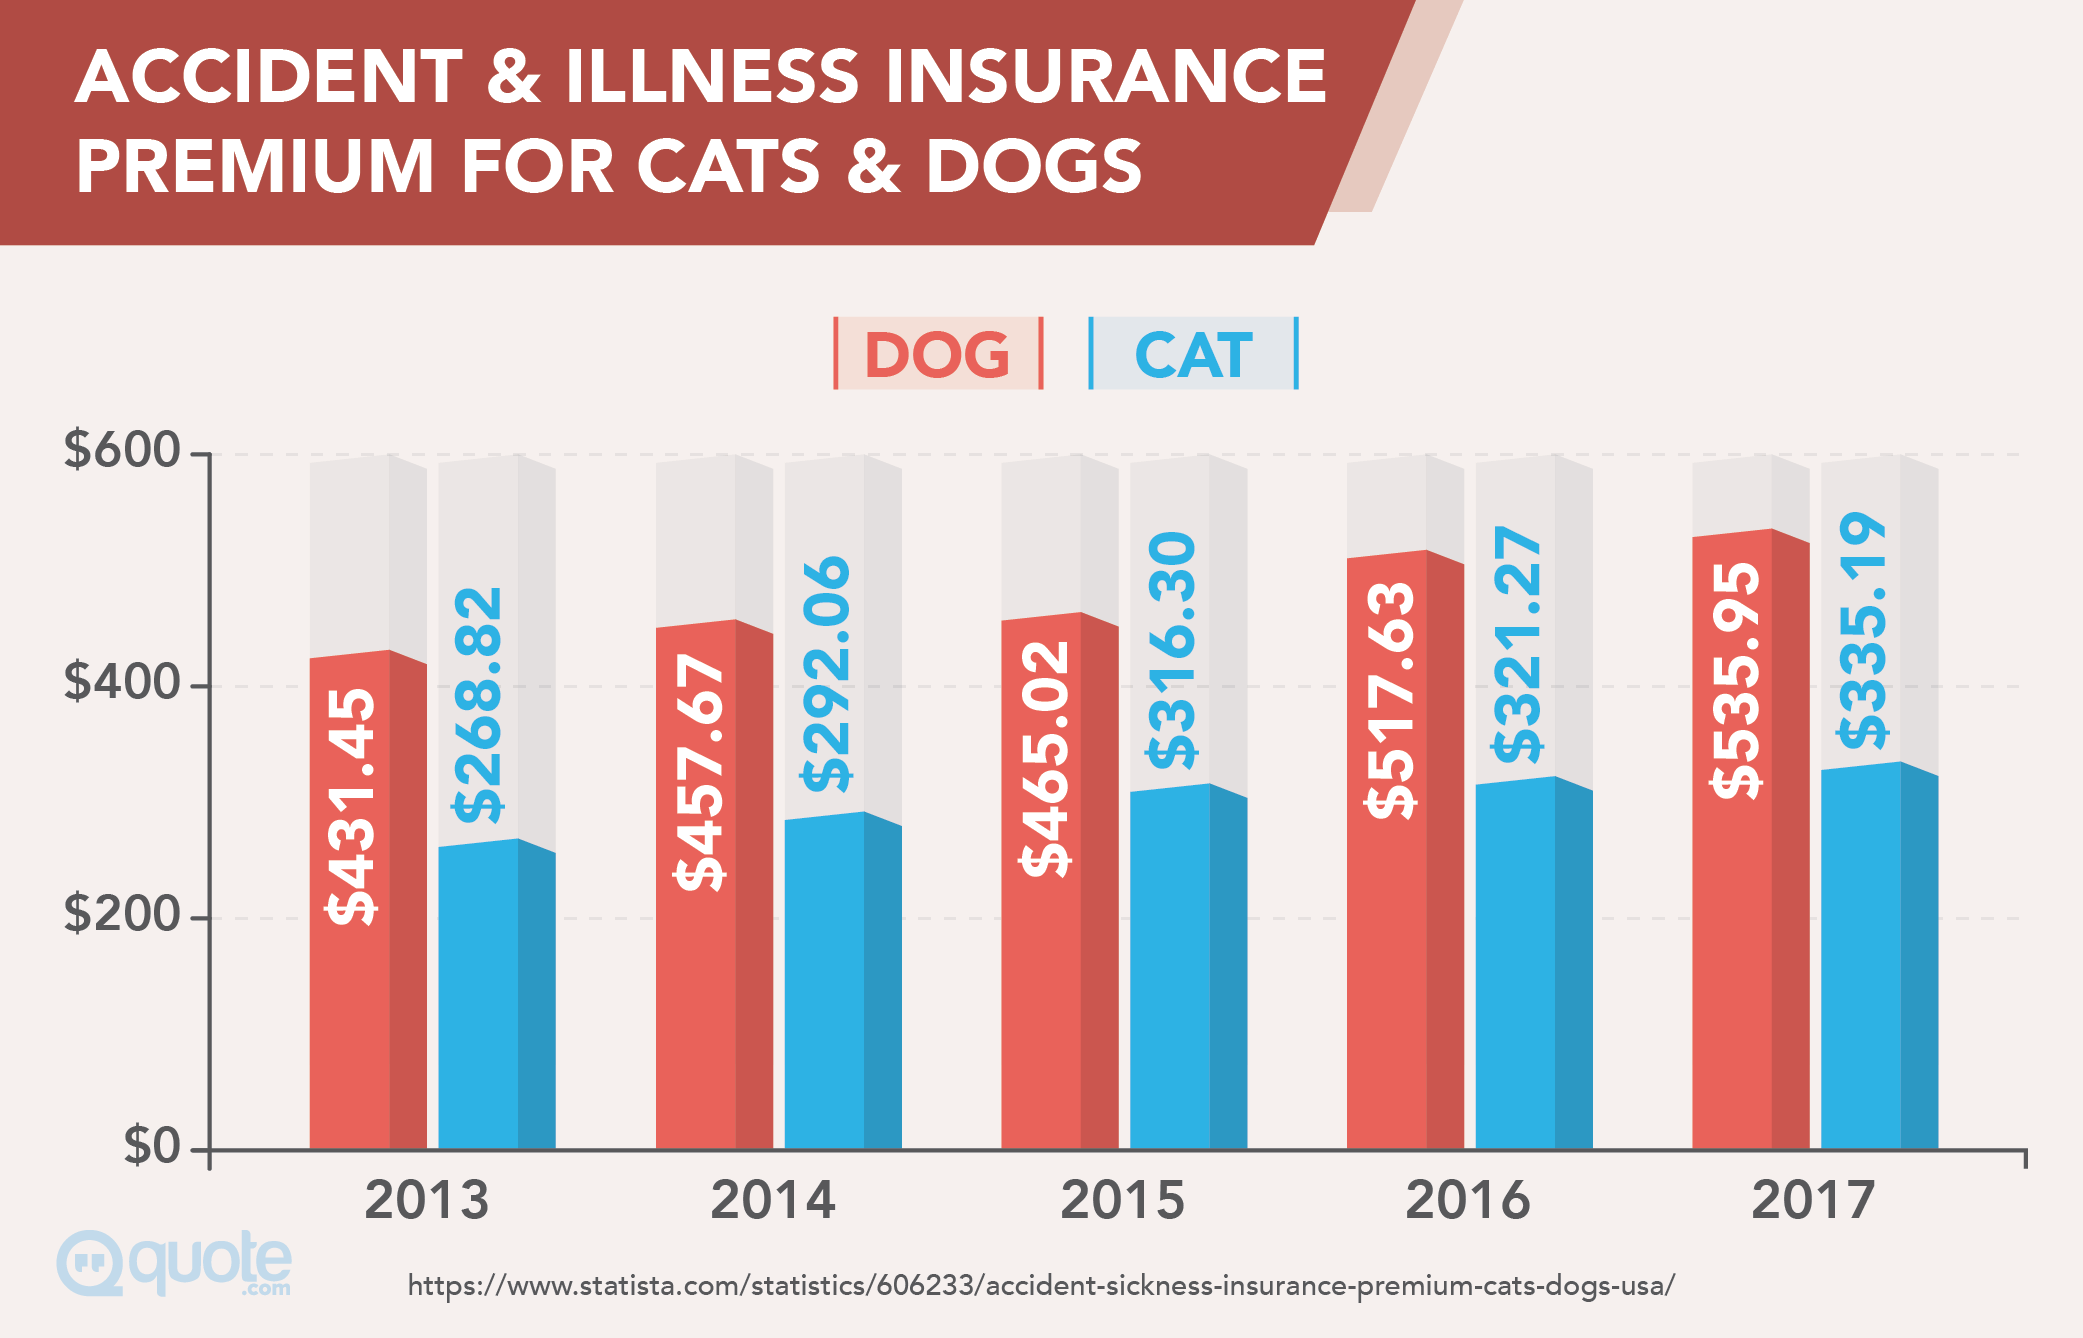 Accident & Illness Insurance Premium For Cats & Dogs from 2013-2017